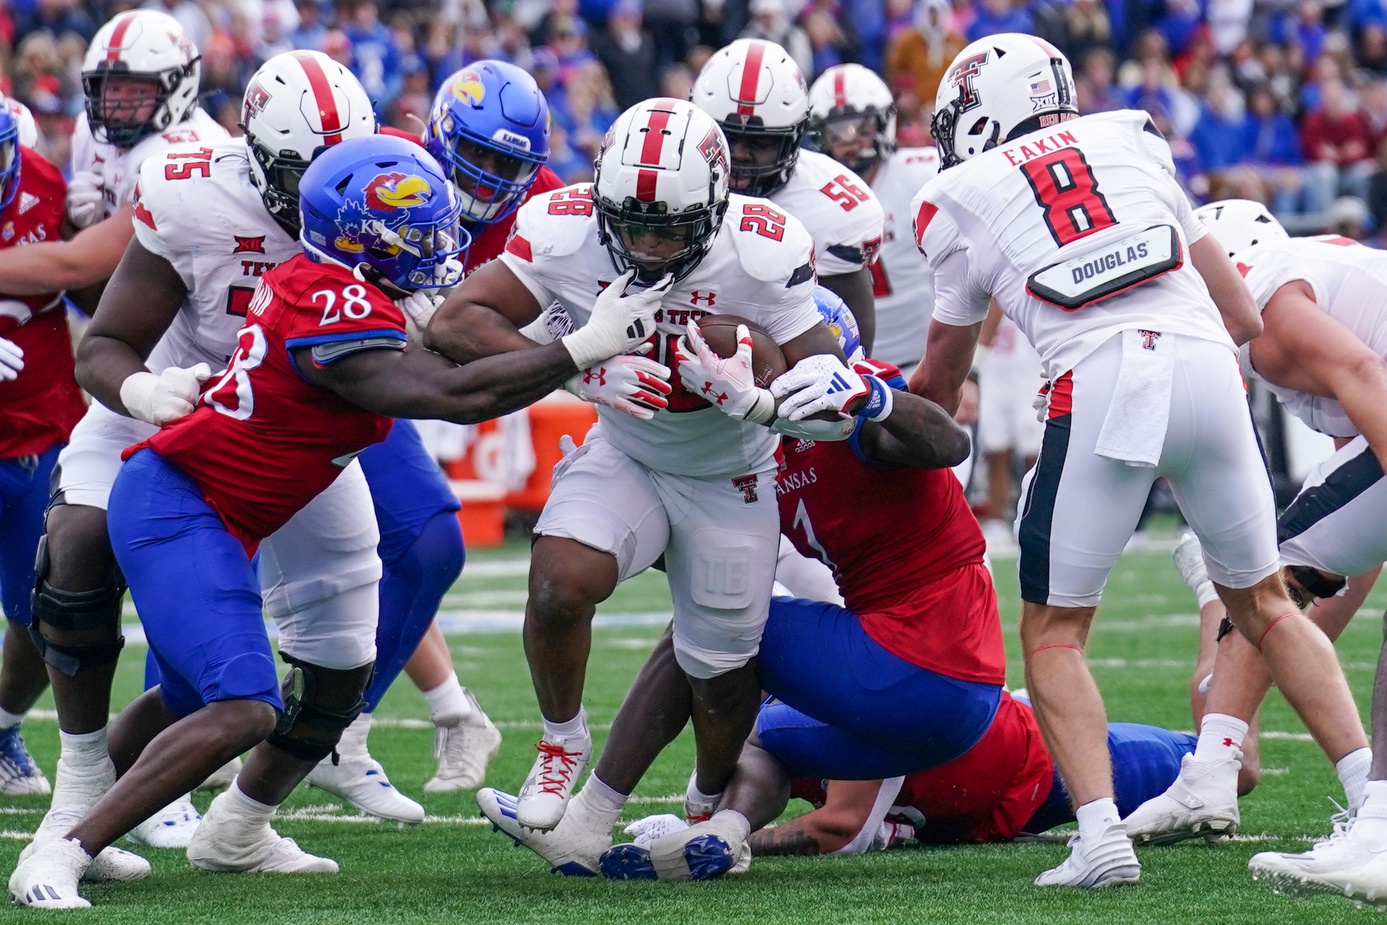 It was an ugly game for Big 12 standards. However, the Red Raiders won't care what it looks like as Texas Tech upsets Kansas.